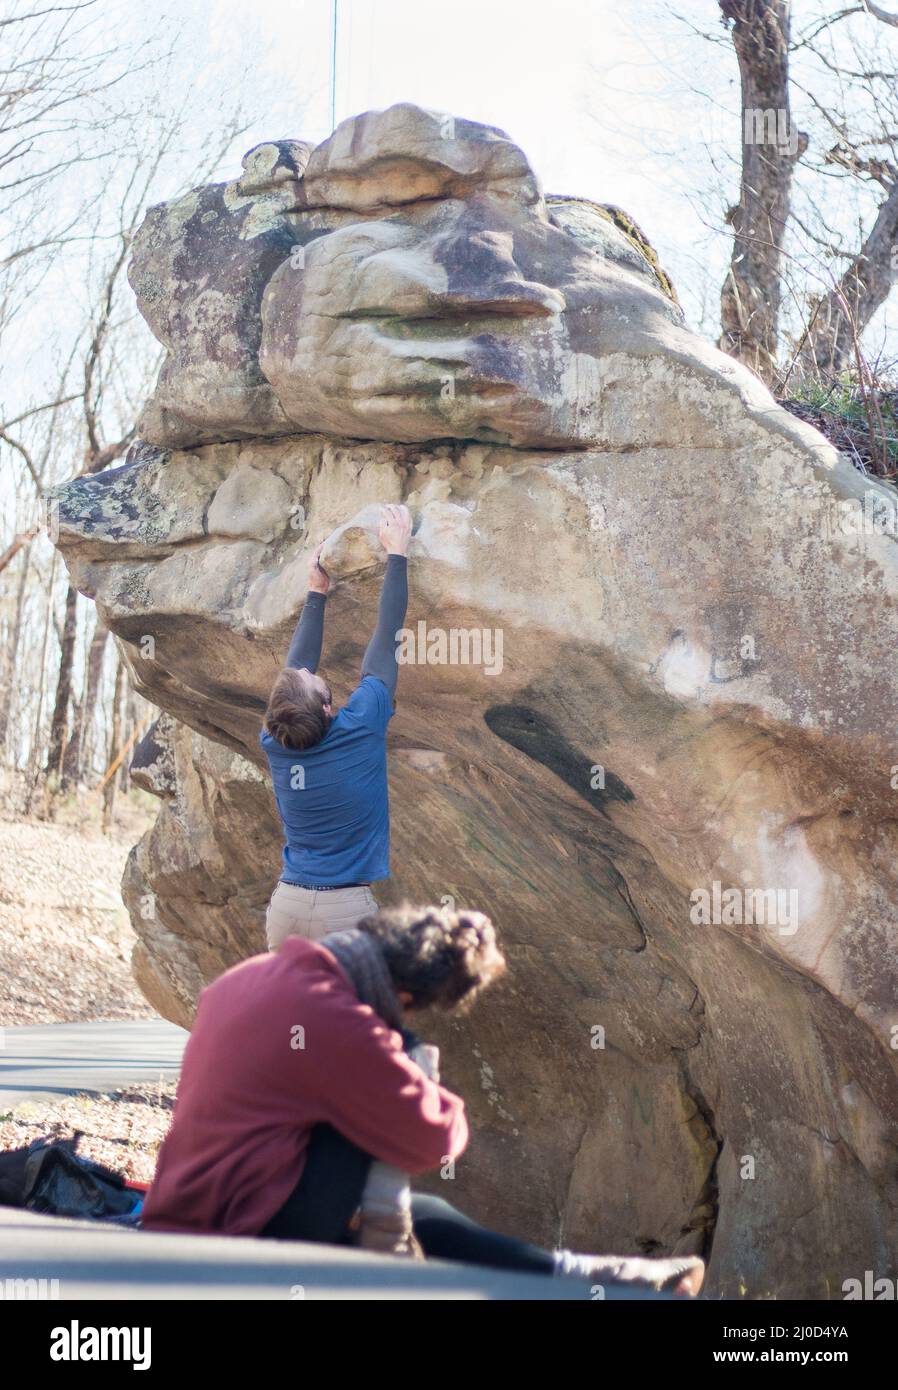 Strong male rock climber jumps to complete sandstone boulder, wife filming (series) Stock Photo